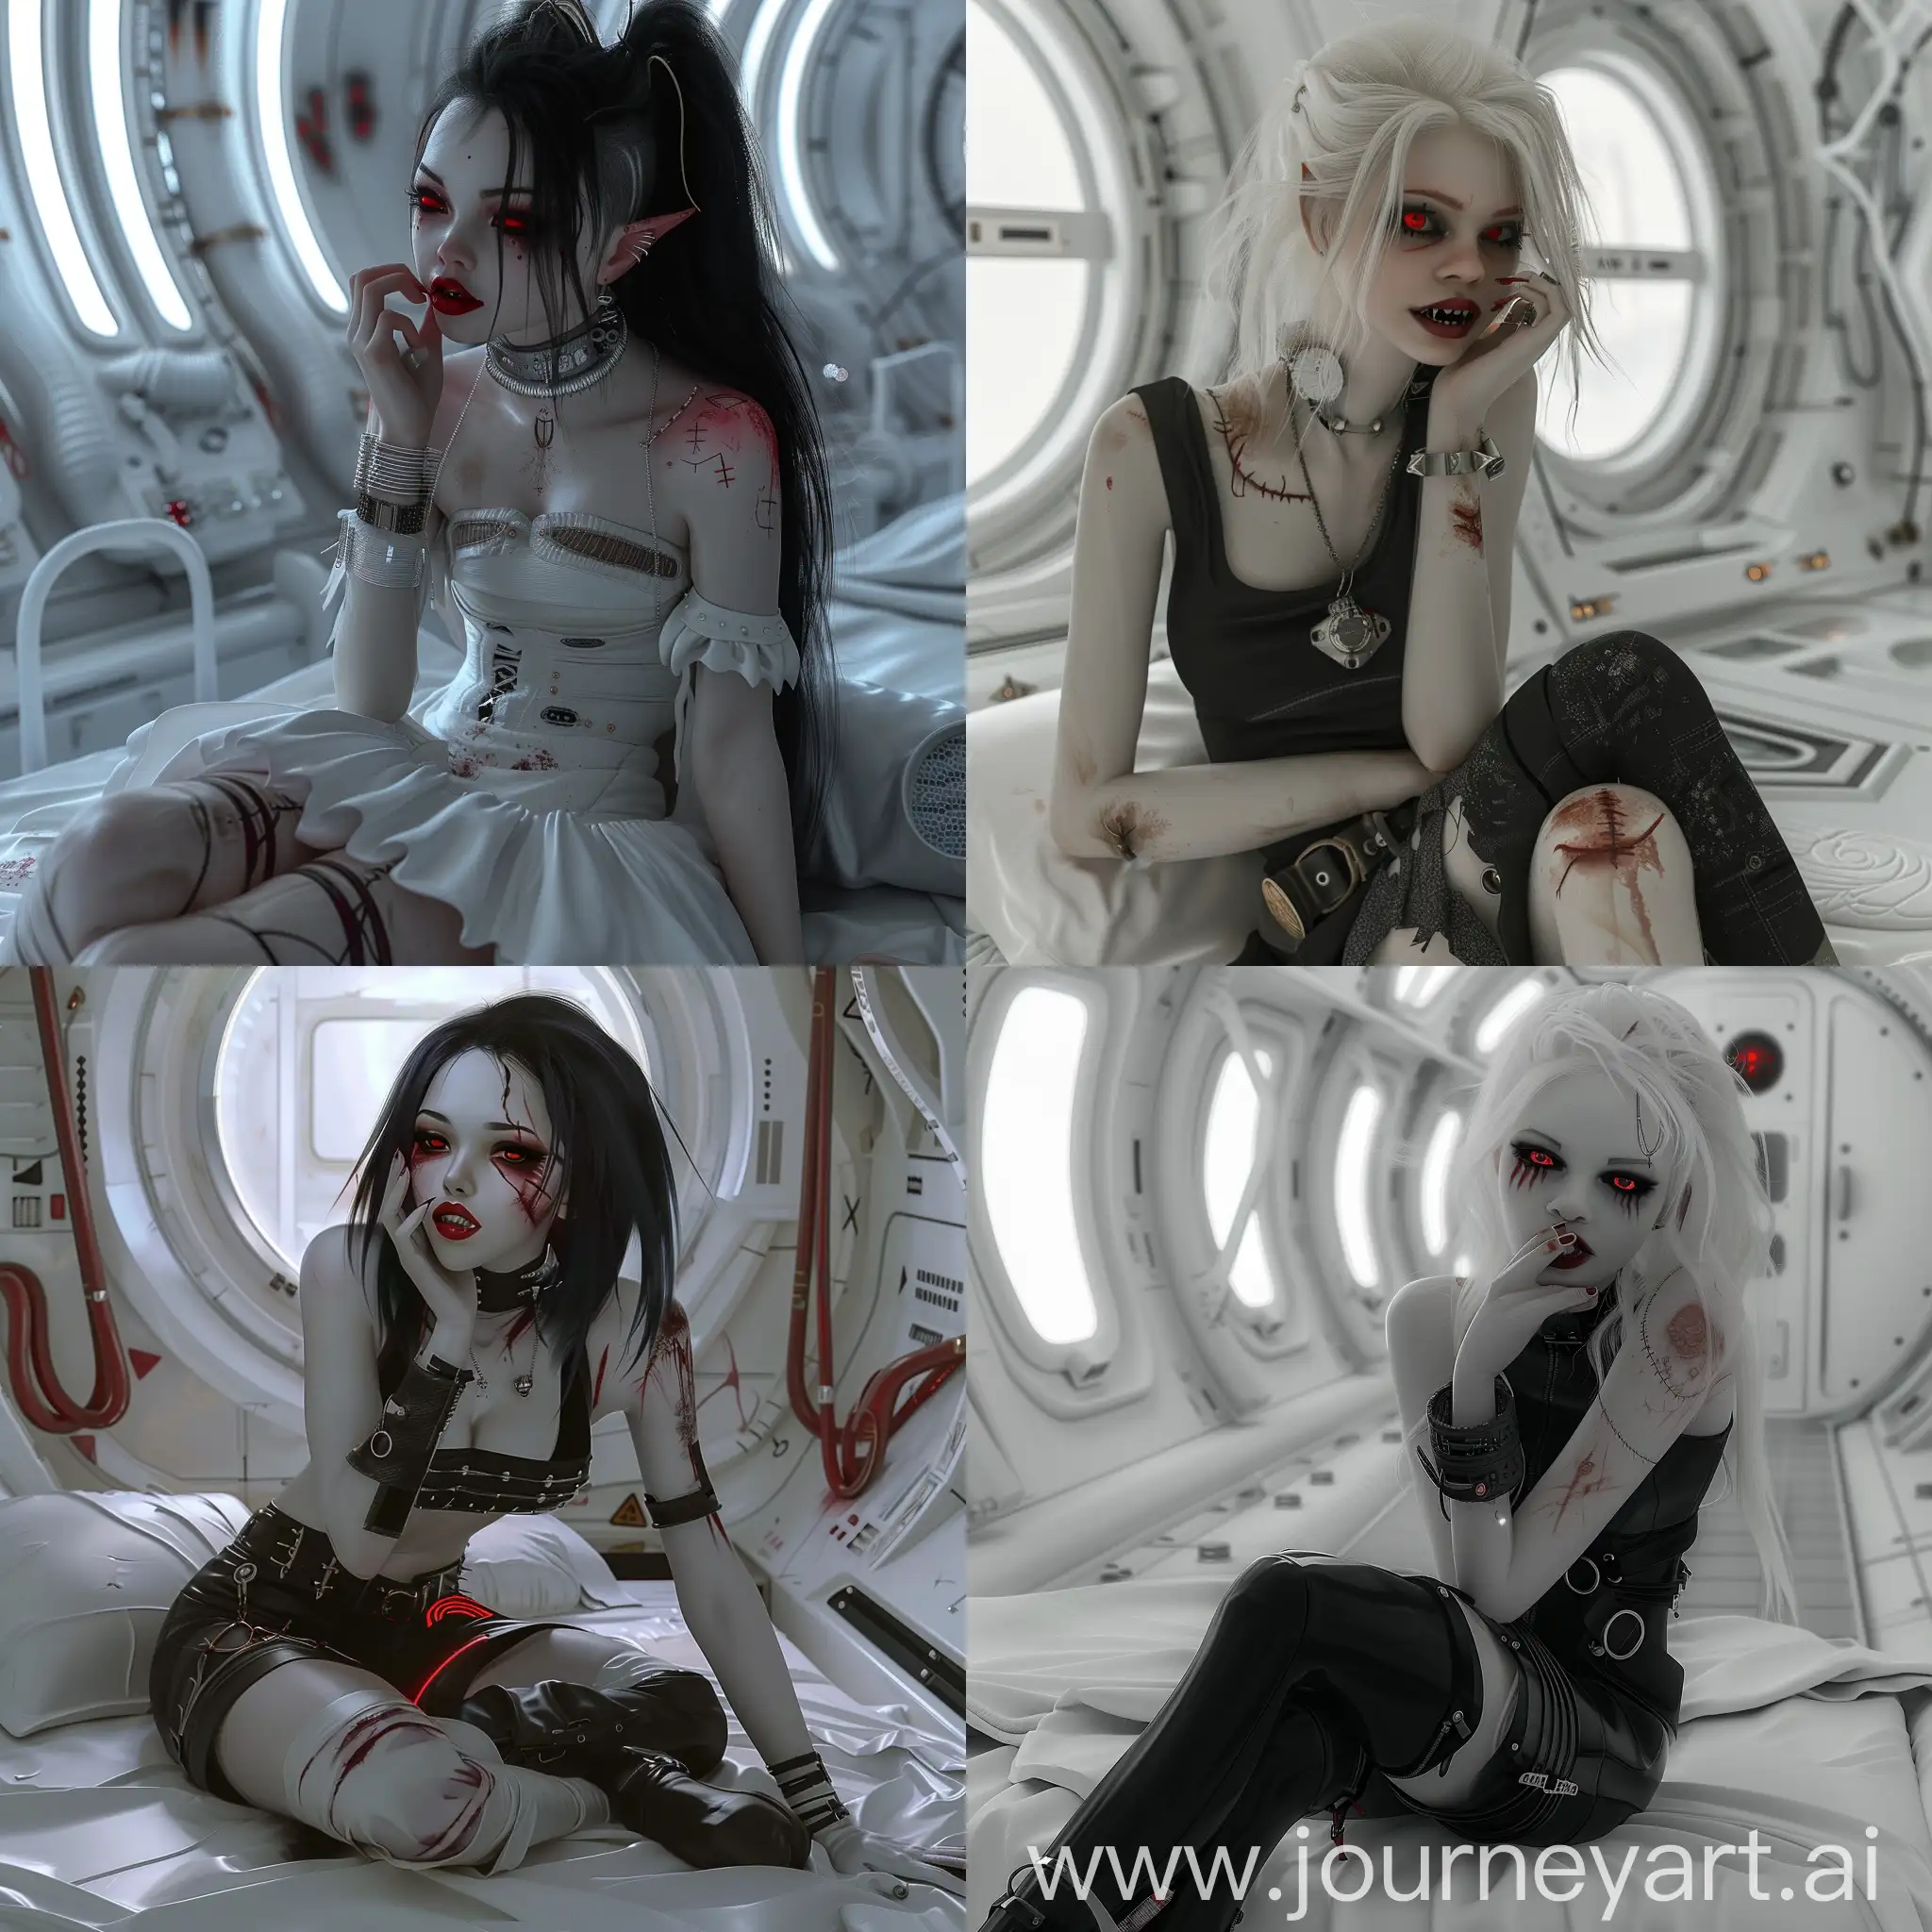 Seductive-Punk-Vampire-Poses-on-Bed-in-SciFi-Space-Station-Setting